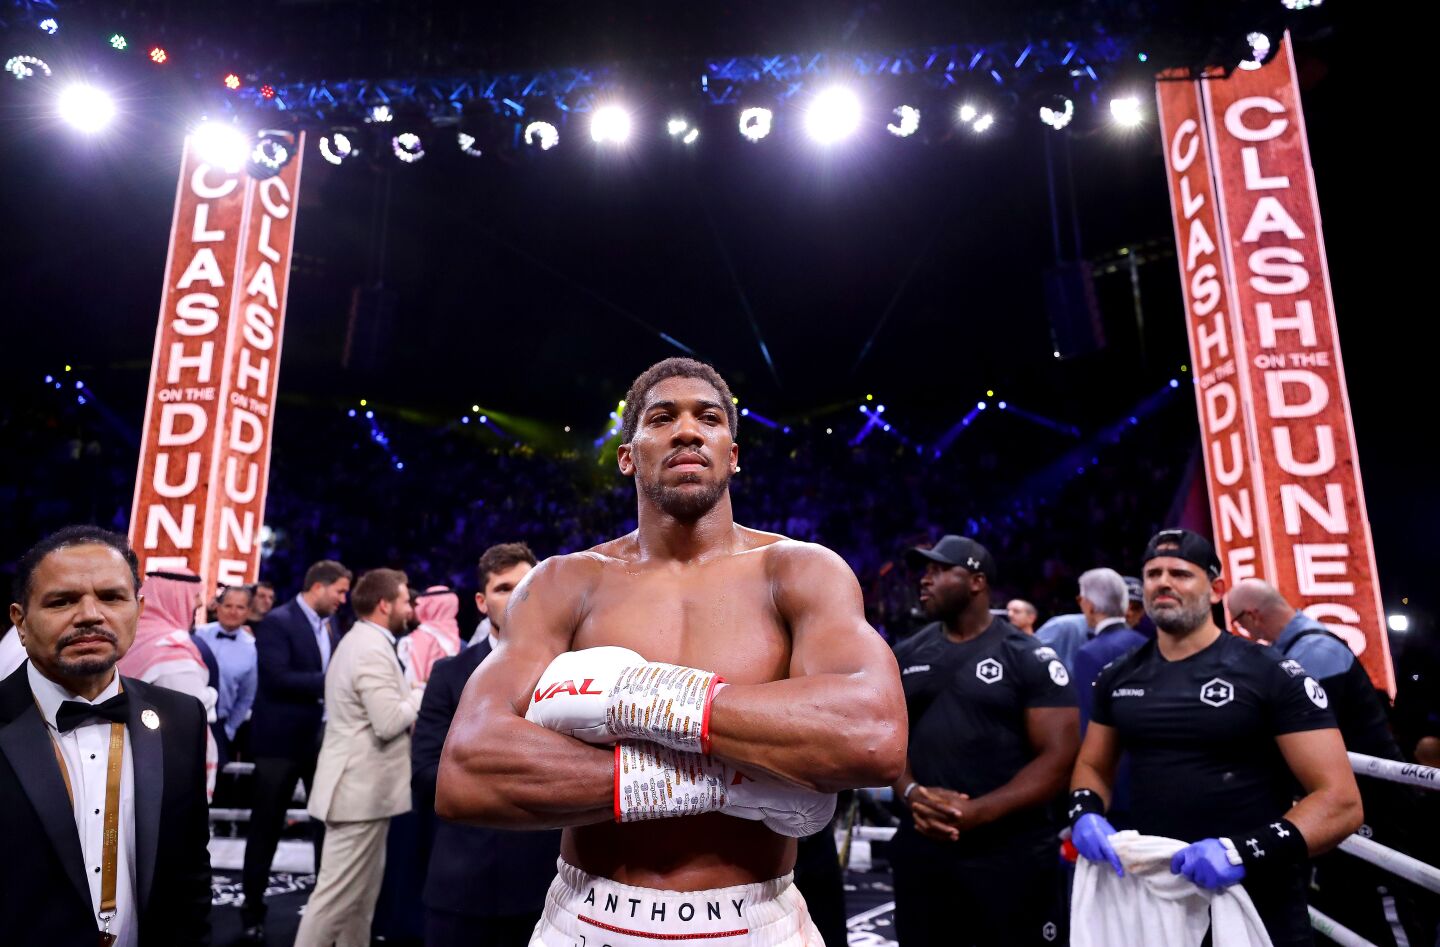 Anthony Joshua celebrates his victory over Andy Ruiz Jr. in a heavyweight title fight on Dec. 7 in Diriyah, Saudi Arabia.